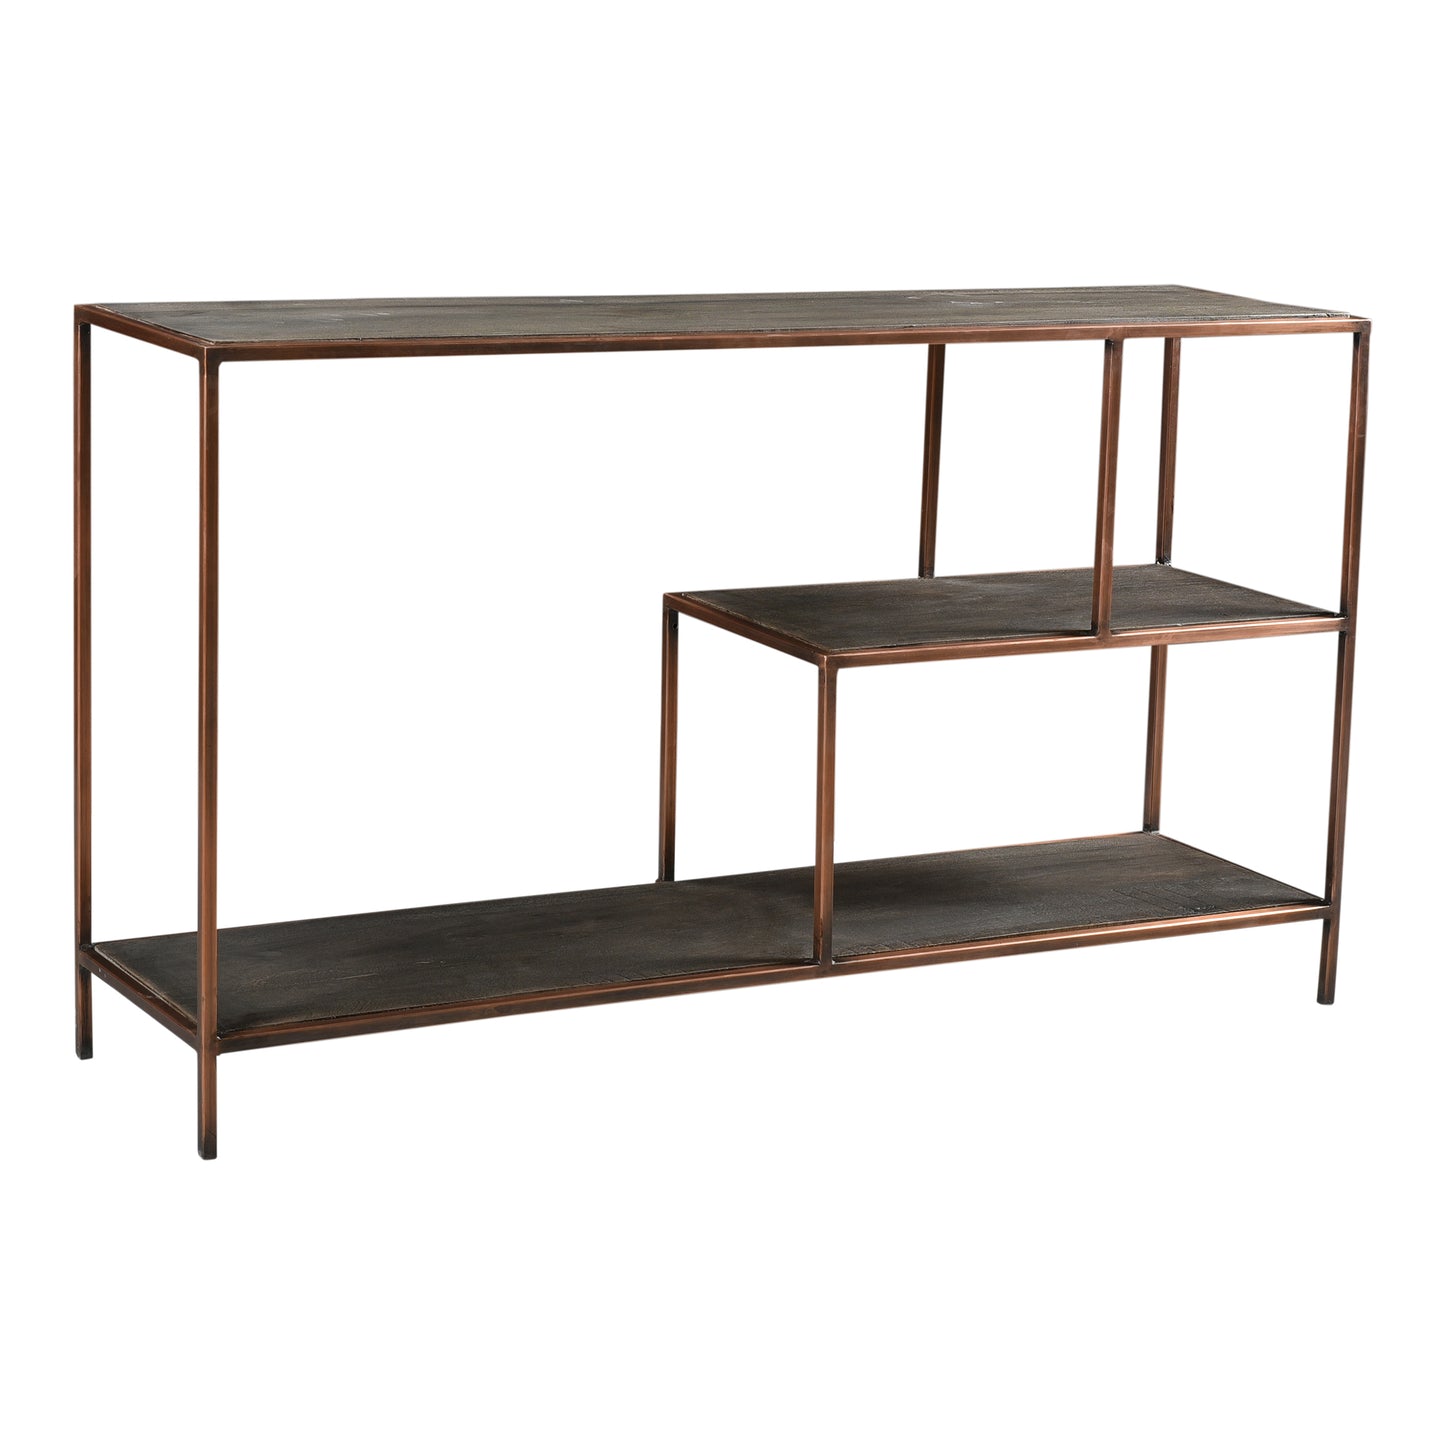 Load image into Gallery viewer, Bates Console Table Console Tables Moe&amp;#39;s     Four Hands, Burke Decor, Mid Century Modern Furniture, Old Bones Furniture Company, Old Bones Co, Modern Mid Century, Designer Furniture, https://www.oldbonesco.com/
